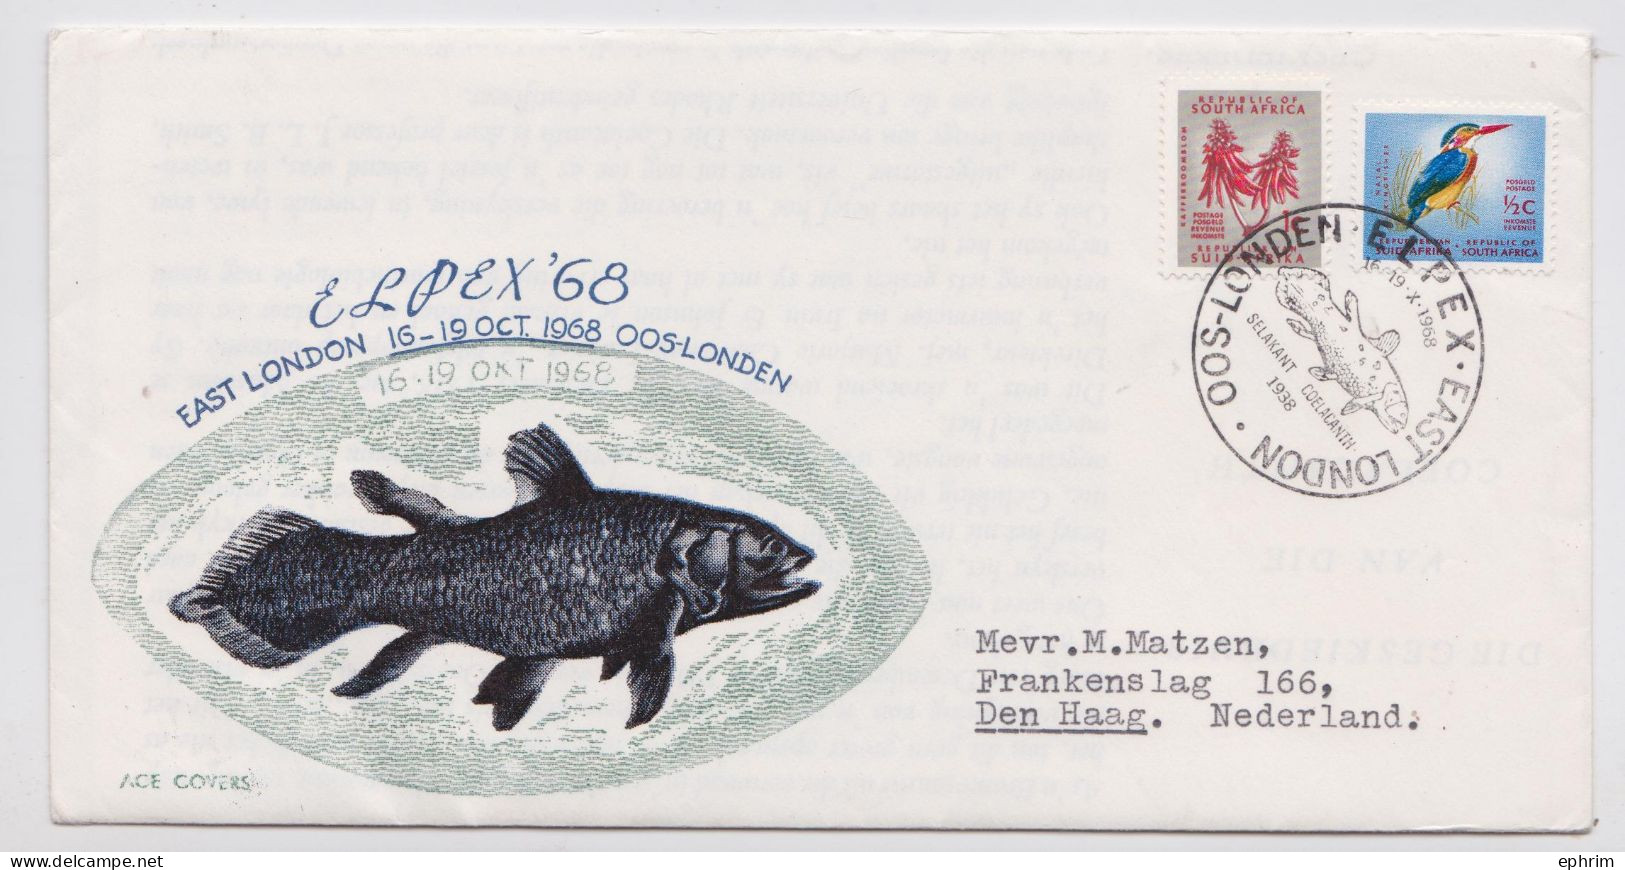 ELPEX 68 EAST LONDON SOUTH AFRICA ENVELOPPE TIMBRE POISSON FOSSILE COELACANTHE FOSSIL COELACANTH SELAKANT STAMP COVER - Brieven En Documenten